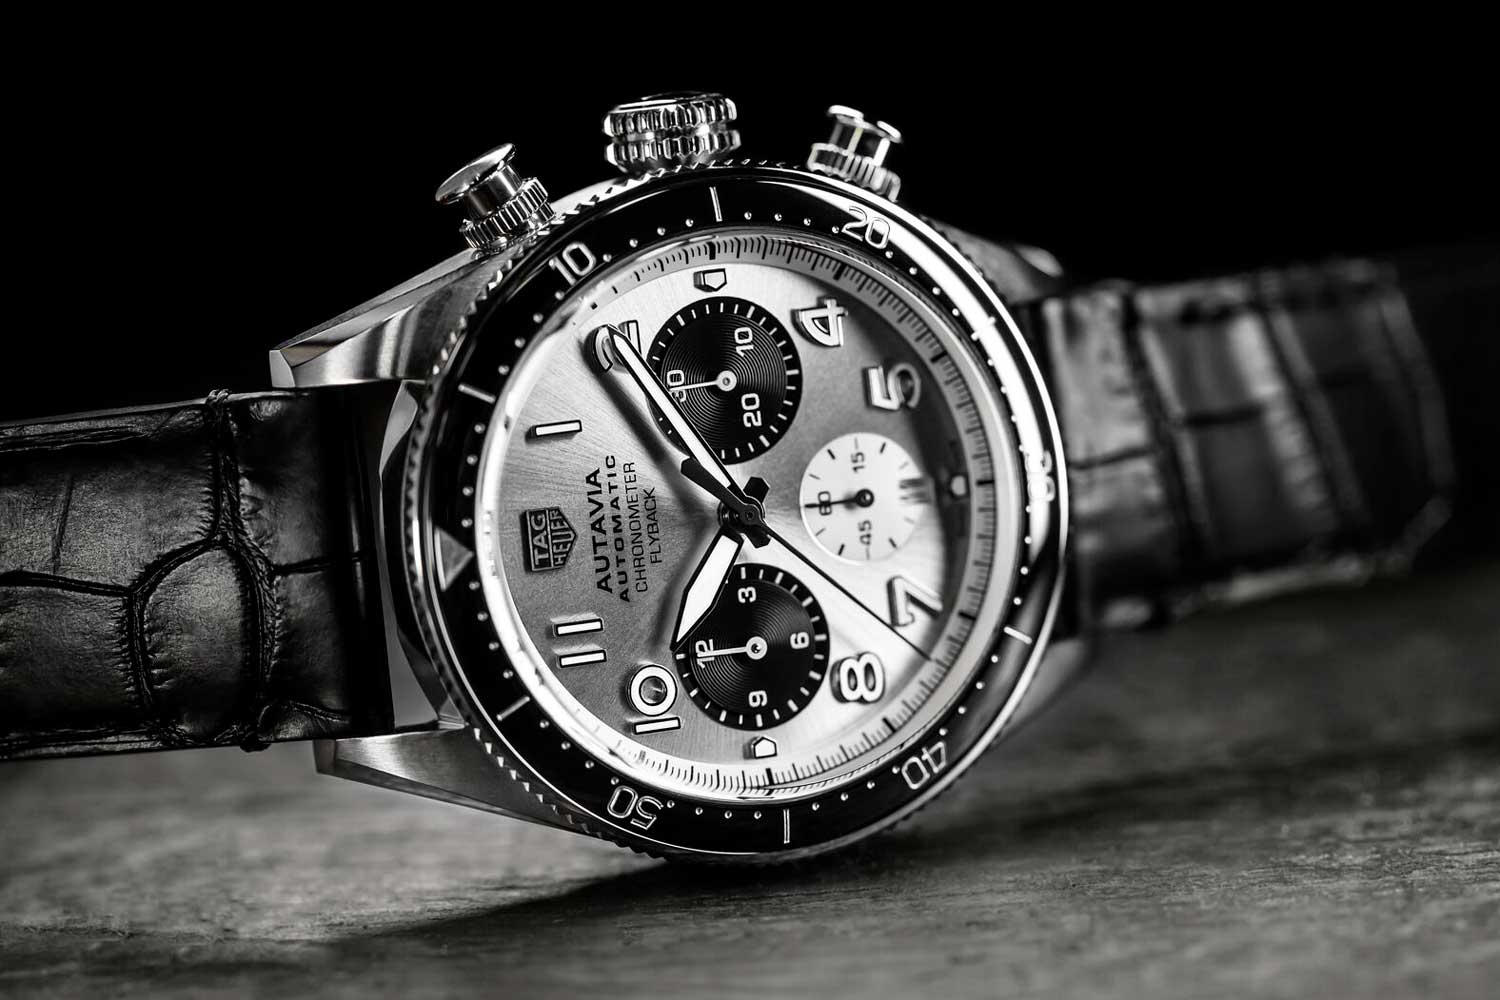 Autavia 60th Anniversary Flyback Chronograph with silver dial and black counters evokes the panda-dial Autavias that were released in very limited quantities in the 1960s